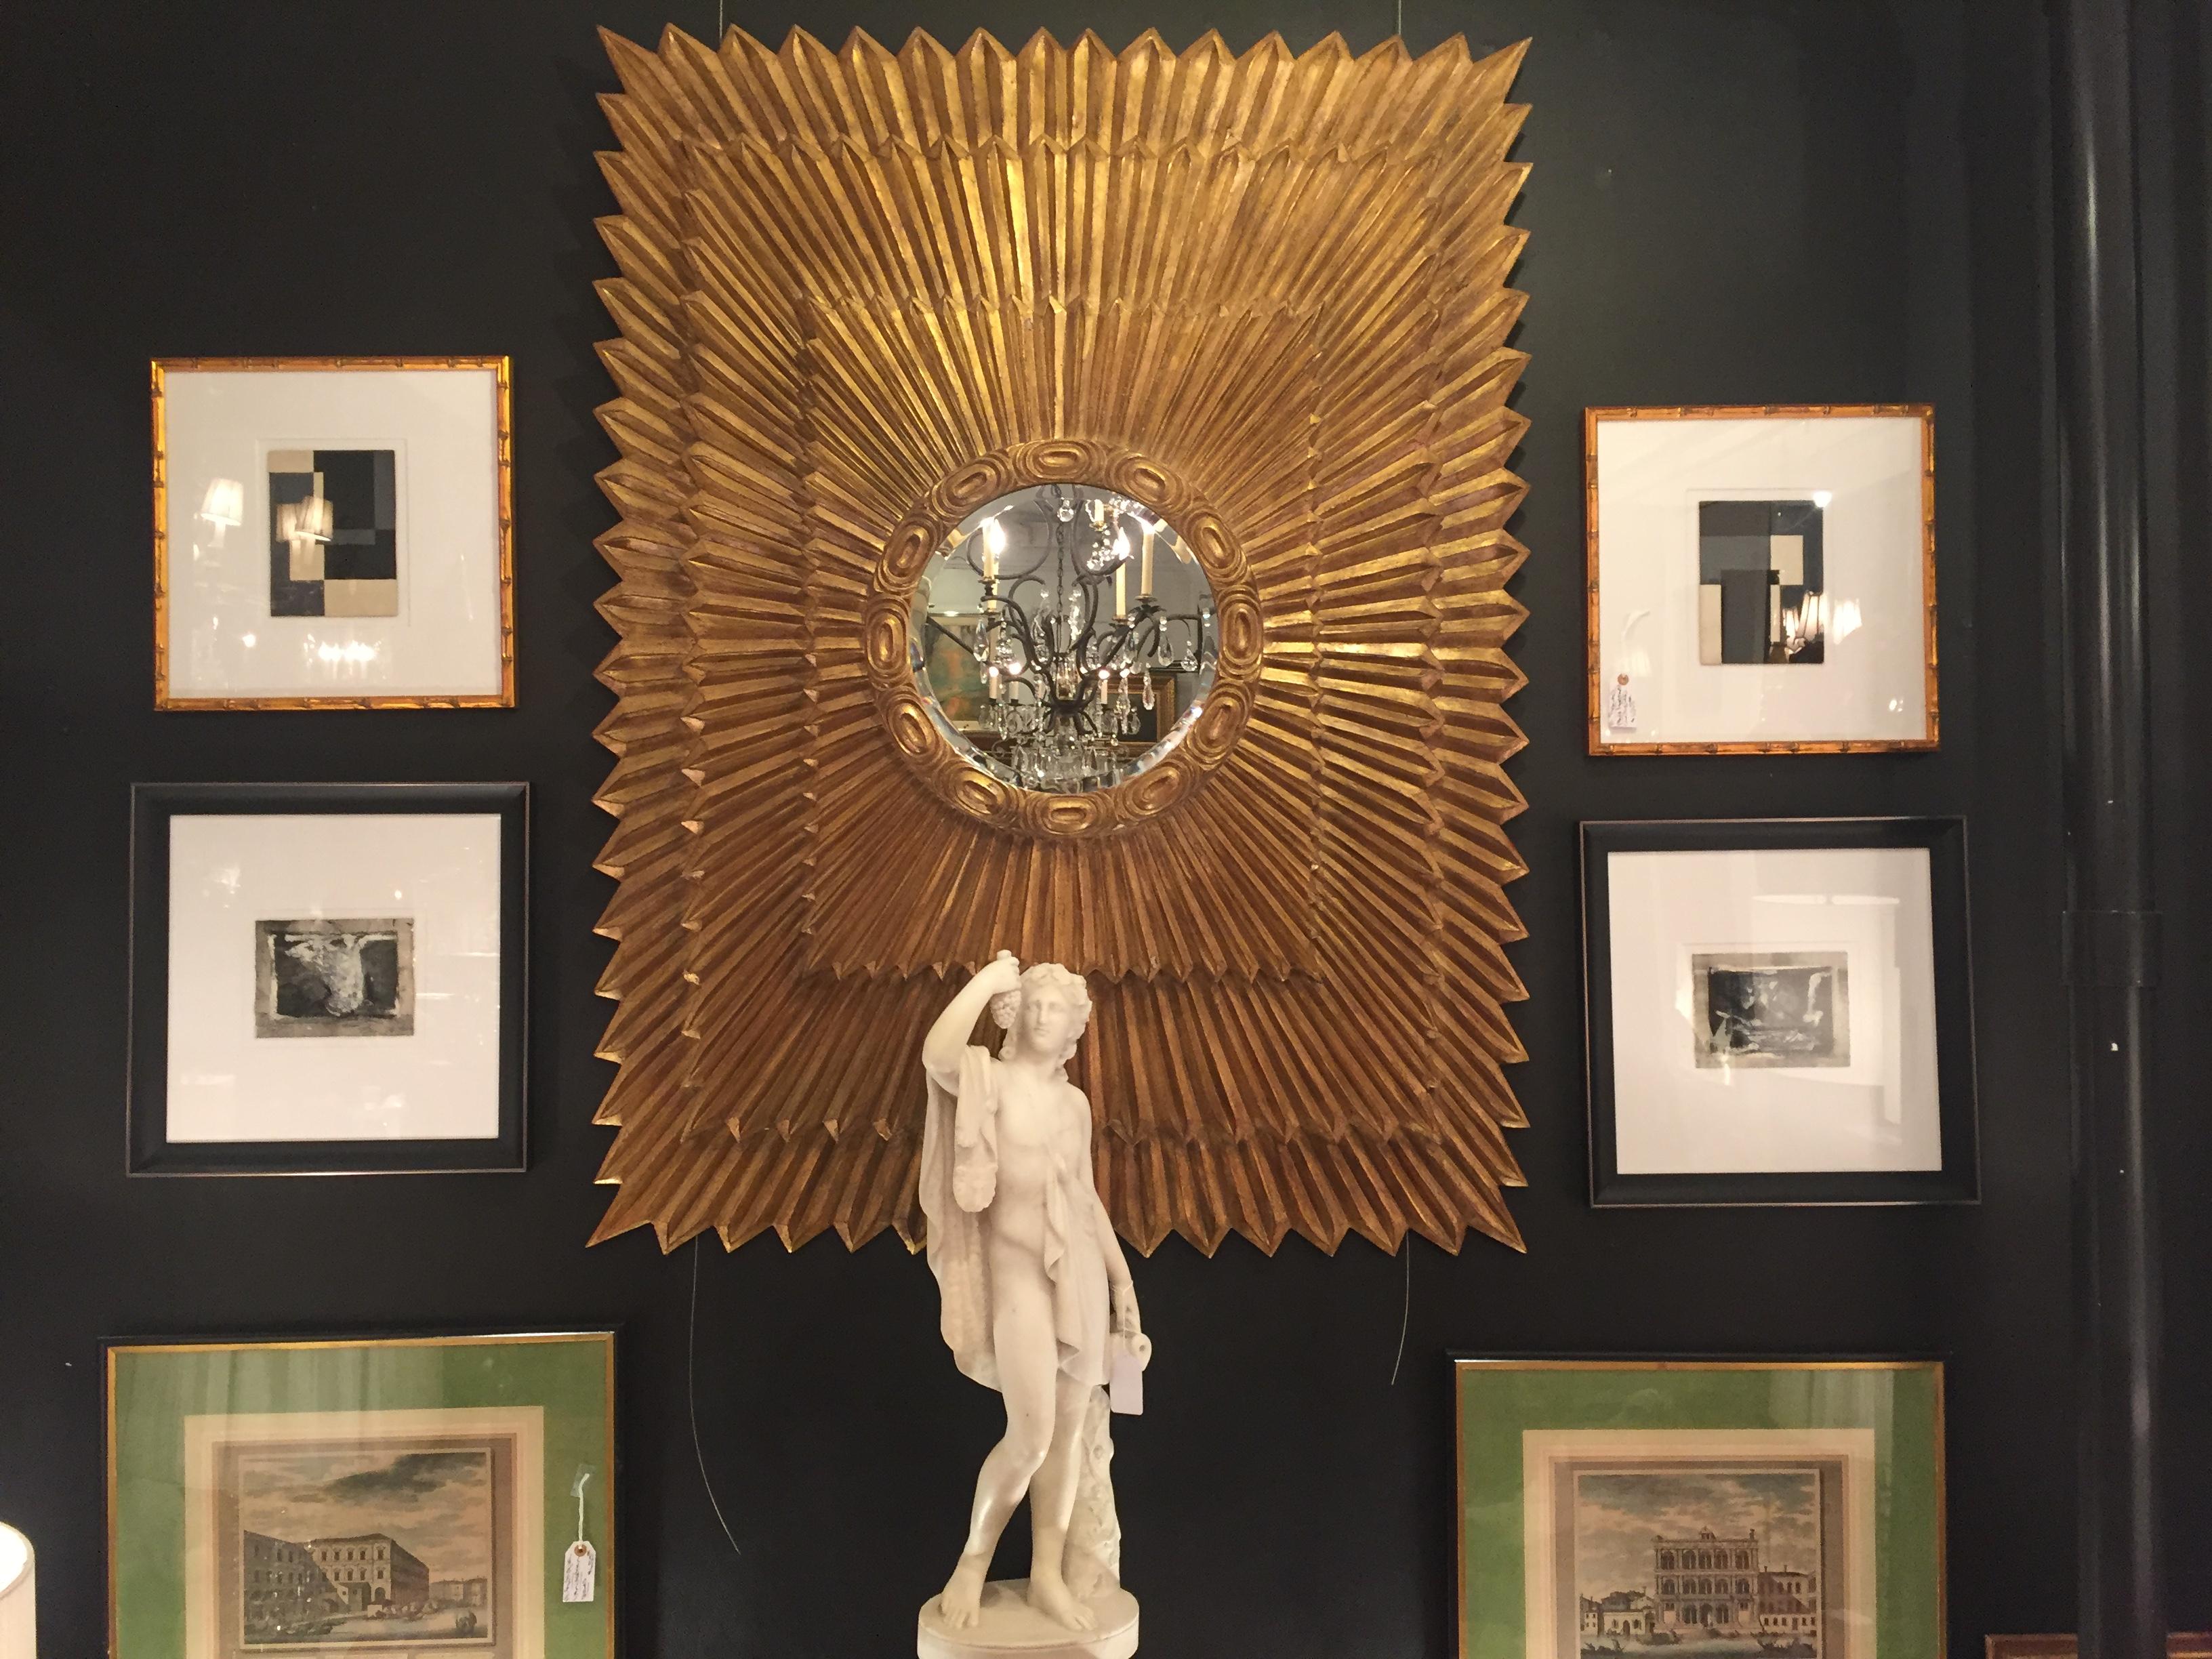 The show stealer mirror because of its monumental size and glitzy giltwood sunburst motif, having three layered rectangles in graduated sizes and a small round mirror in the centre.